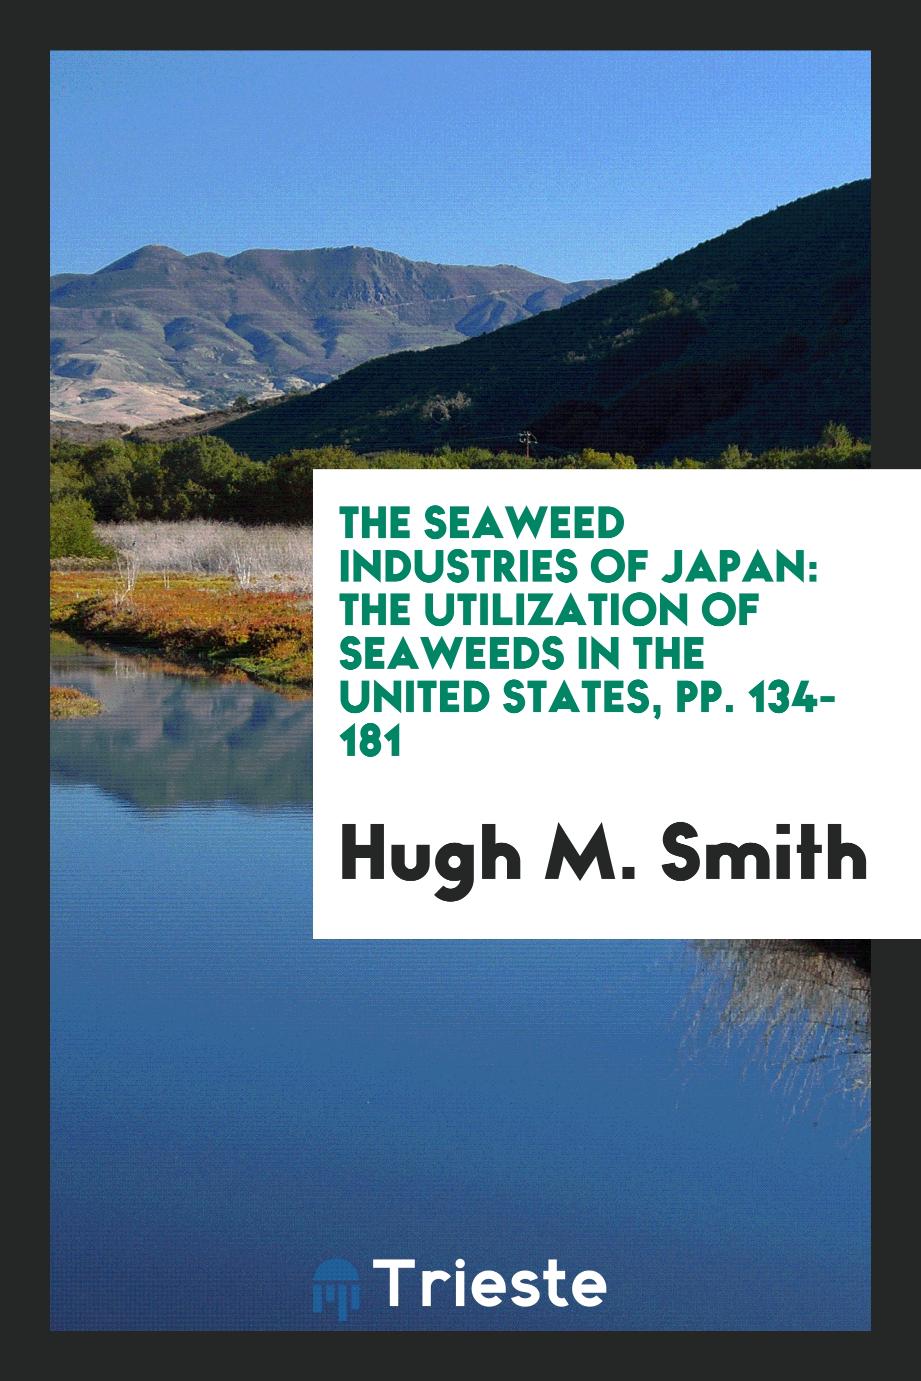 The Seaweed Industries of Japan: The Utilization of Seaweeds in the United States, pp. 134-181